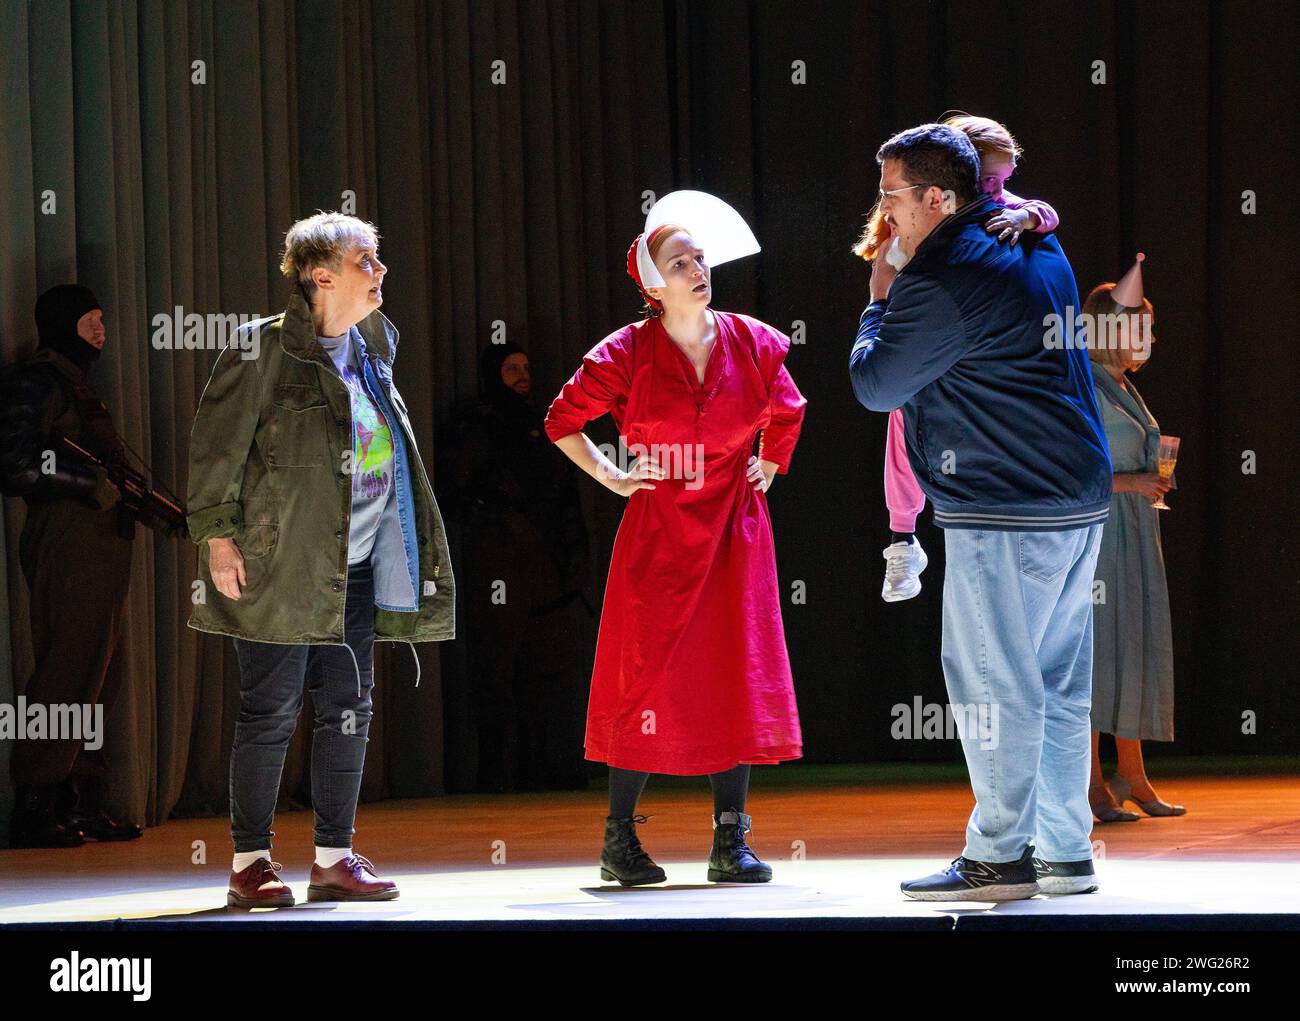 l-r: Susan Bickley (Offred's Mother), Kate Lindsey (Offred), John Findon (Luke) in THE HANDMAID'S TALE at English National Opera (ENO), London Coliseum, London WC2  01/02/2024  music: Poul Ruders  libretto: Paul Bentley after the novel by Margaret Atwood  conductor: Joana Carneiro  design: Annemarie Woods  video design: Akhila Krishnan  original lighting: Paule Constable  original movement & intimacy coordinator: Imogen Knight  director: Annilese Miskimmon Stock Photo